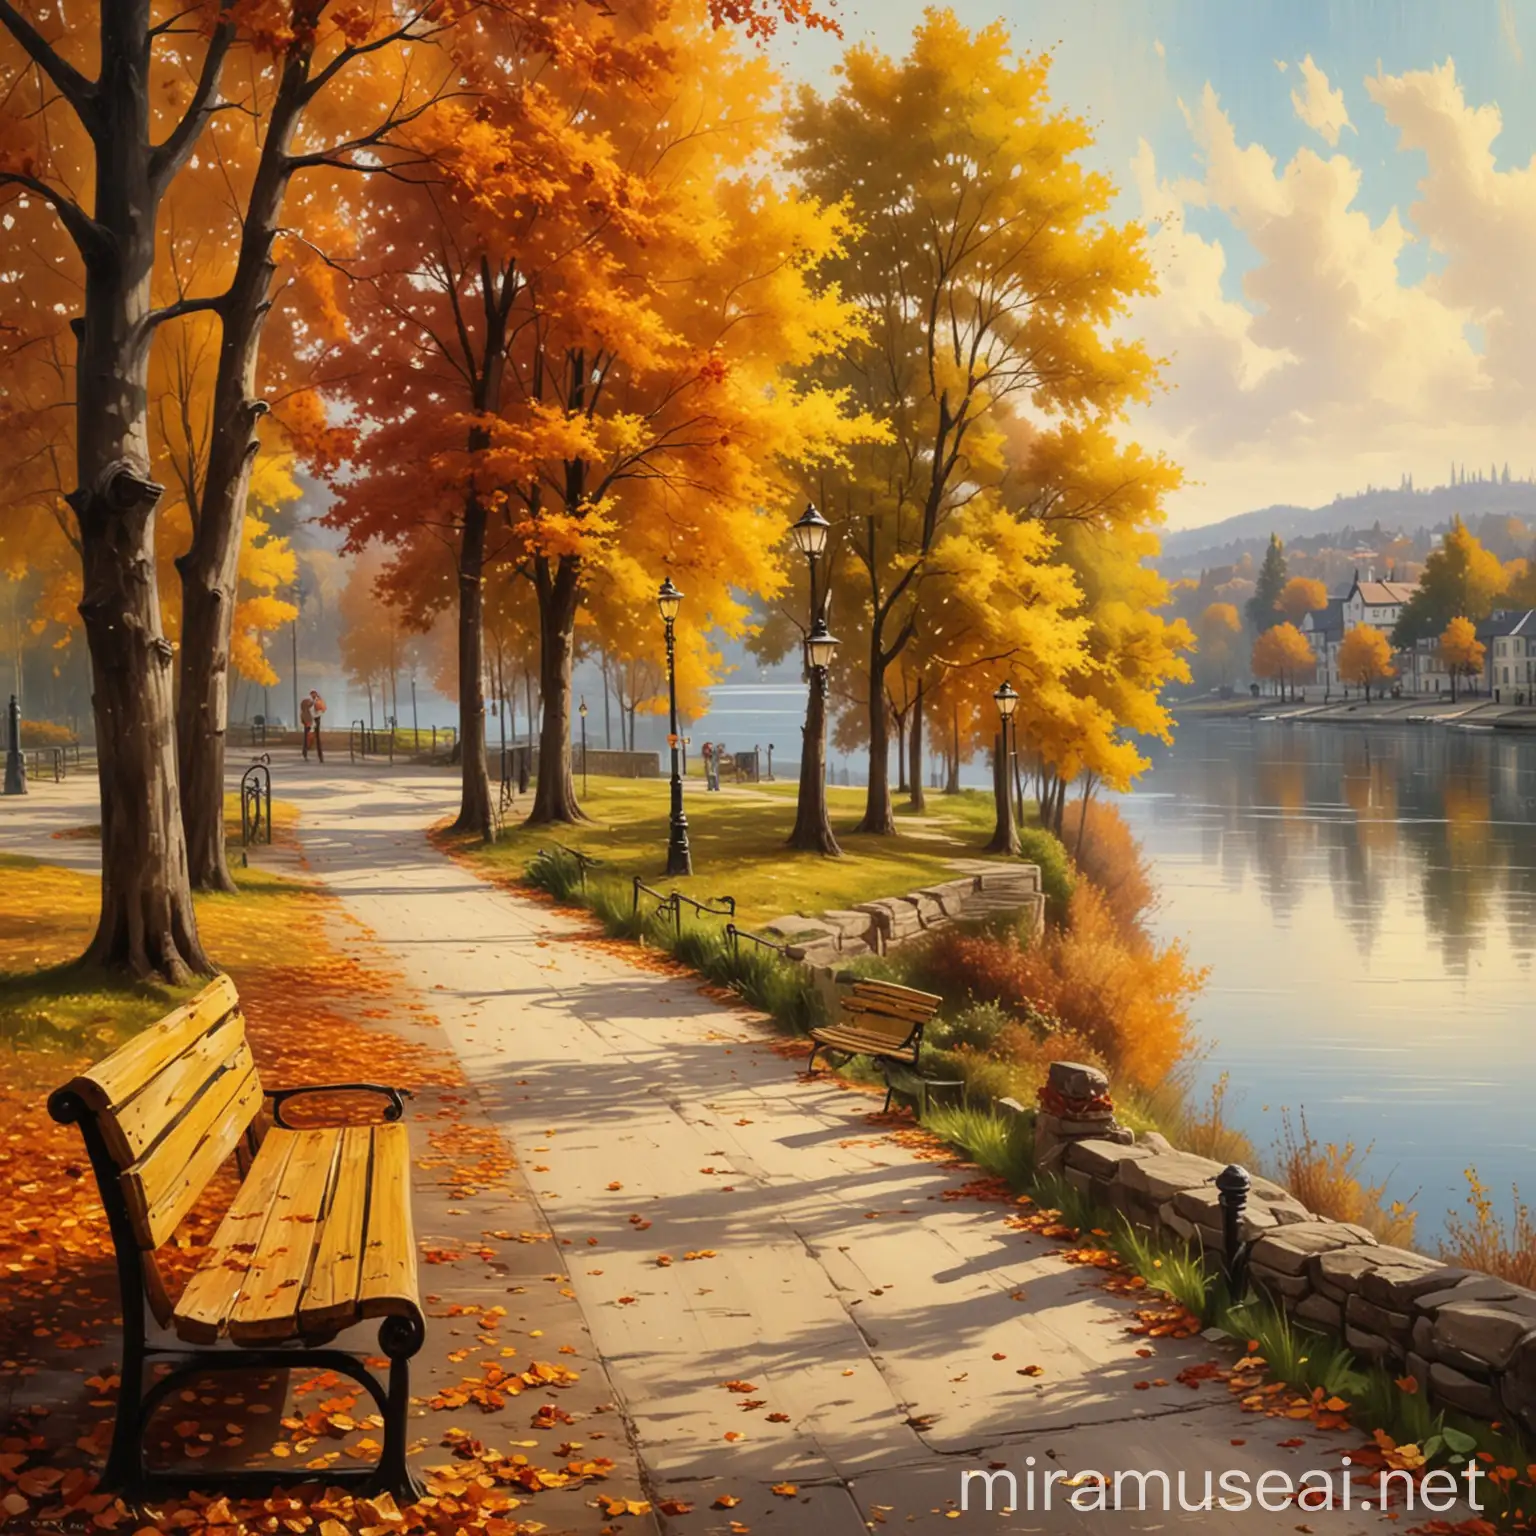 Autumn Lakeside Scene with Benches and Street Lights in Yellowish Hues